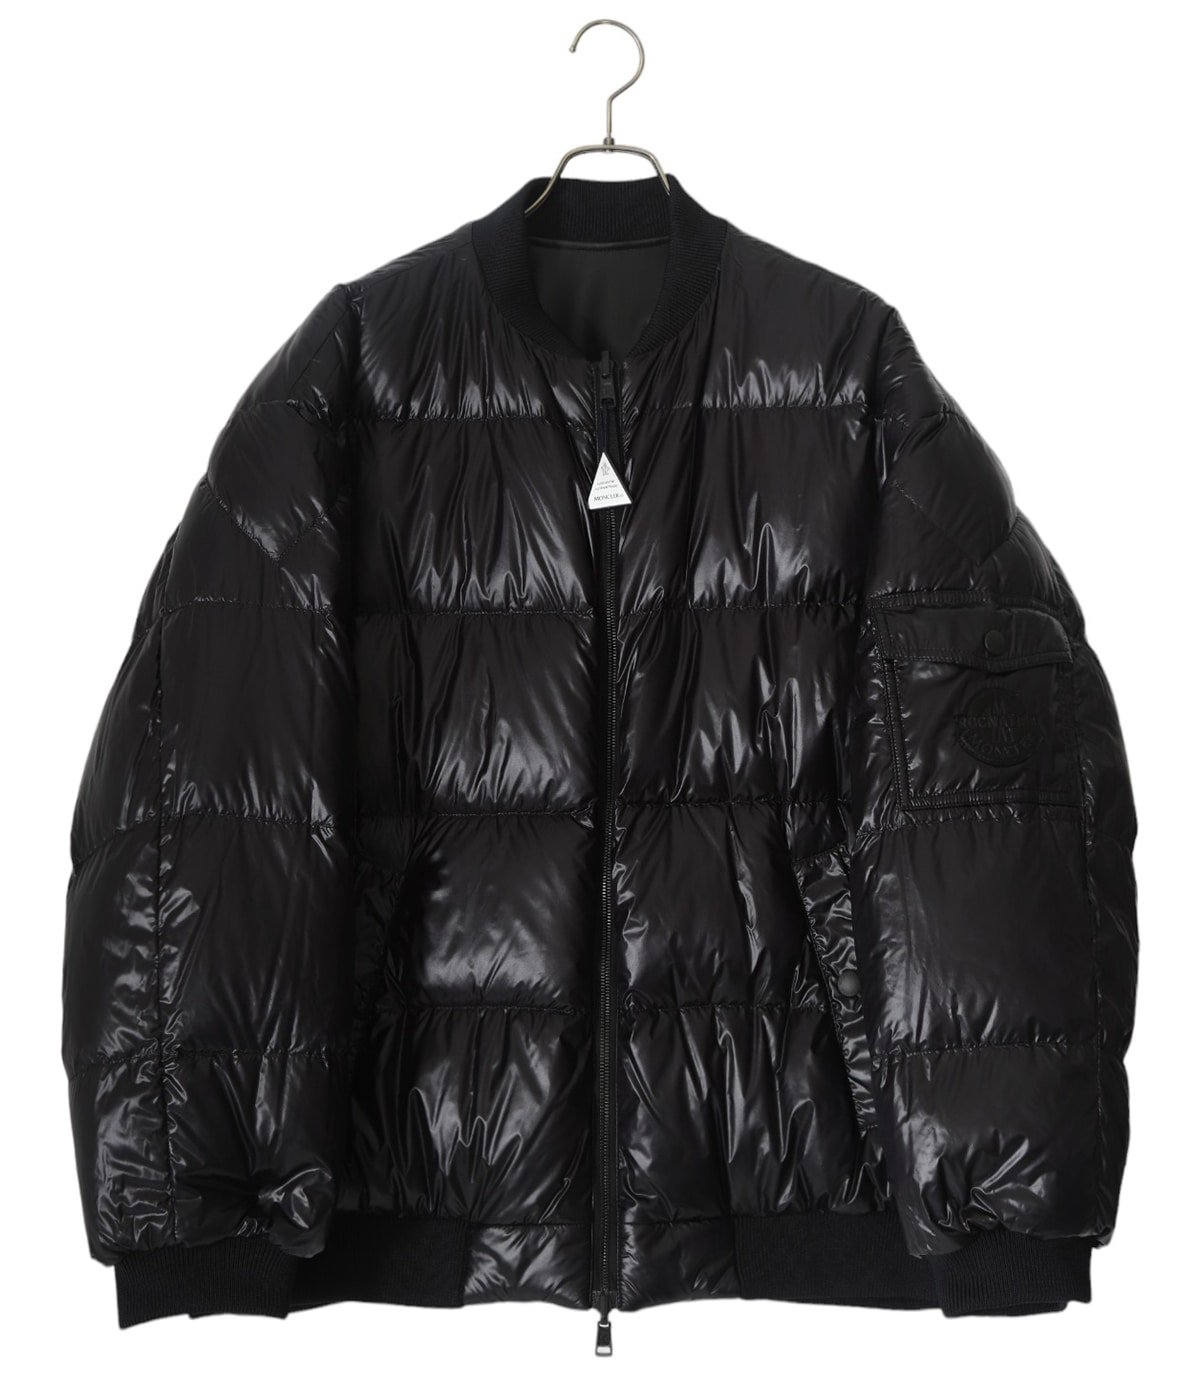 CASSIOPEIA BOMBER | MONCLER X ROC NATION DESIGNED BY JAY-Z 